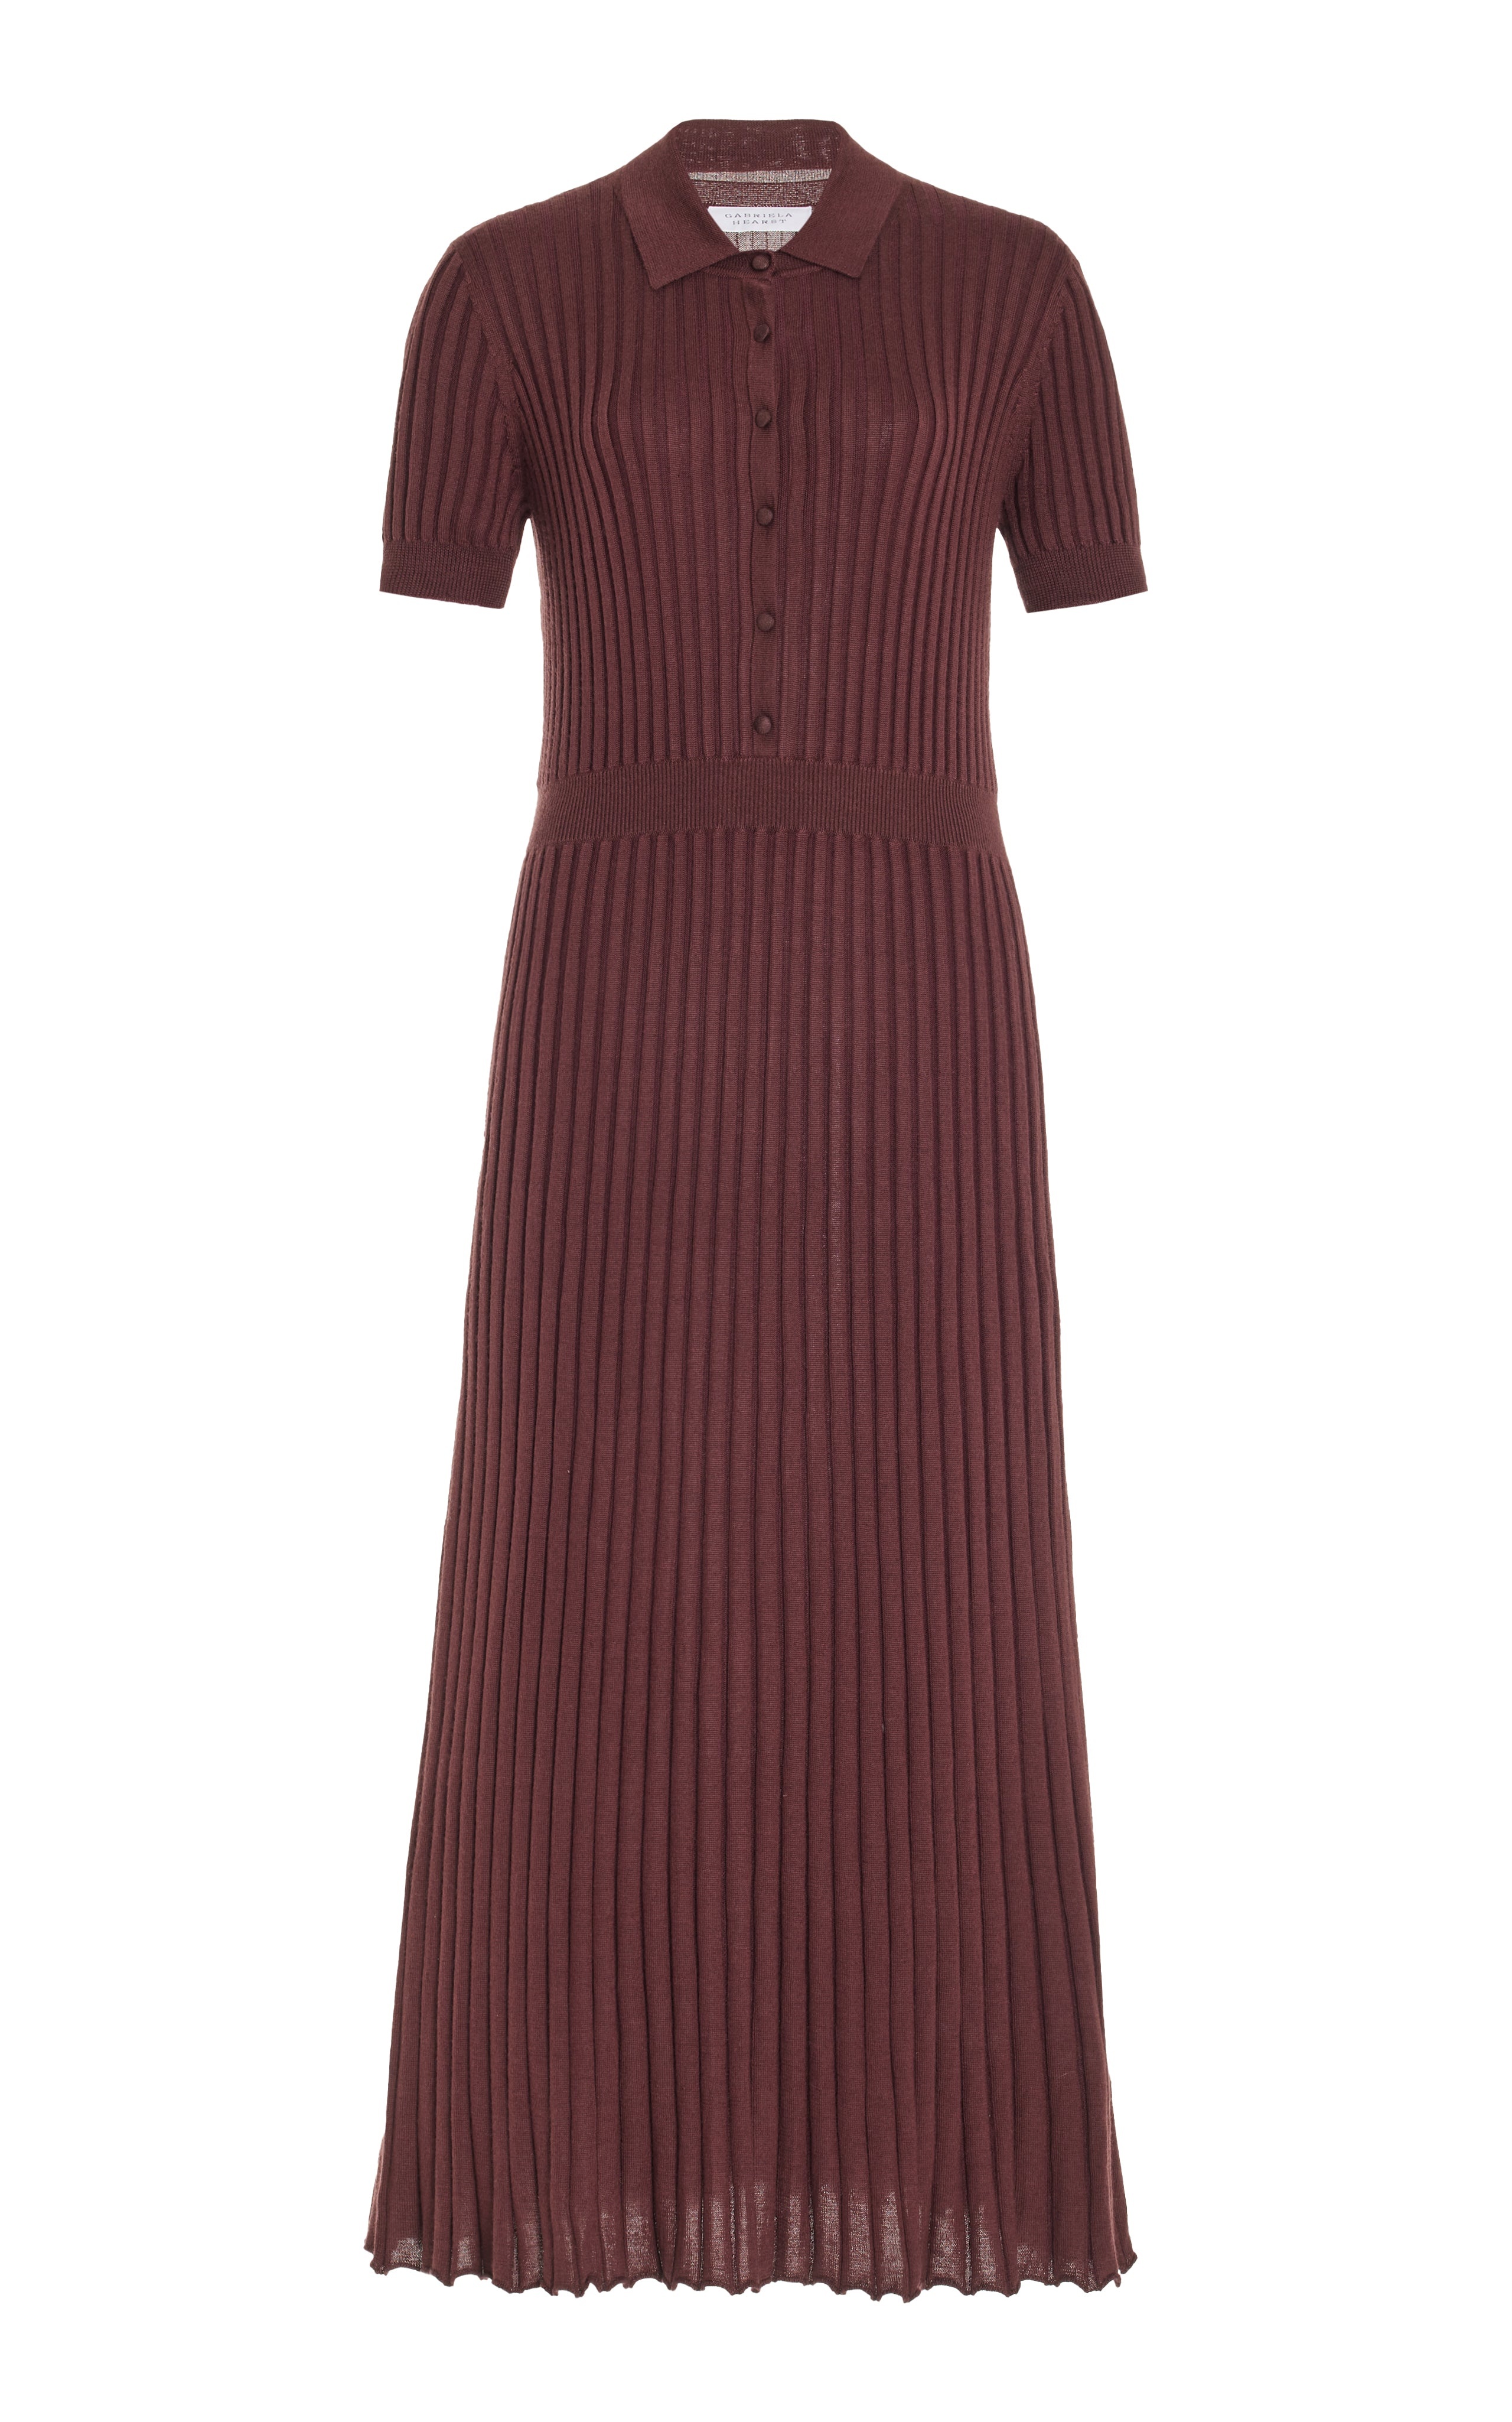 Amor Ribbed Dress in Deep Bordeaux Silk Cashmere - 1